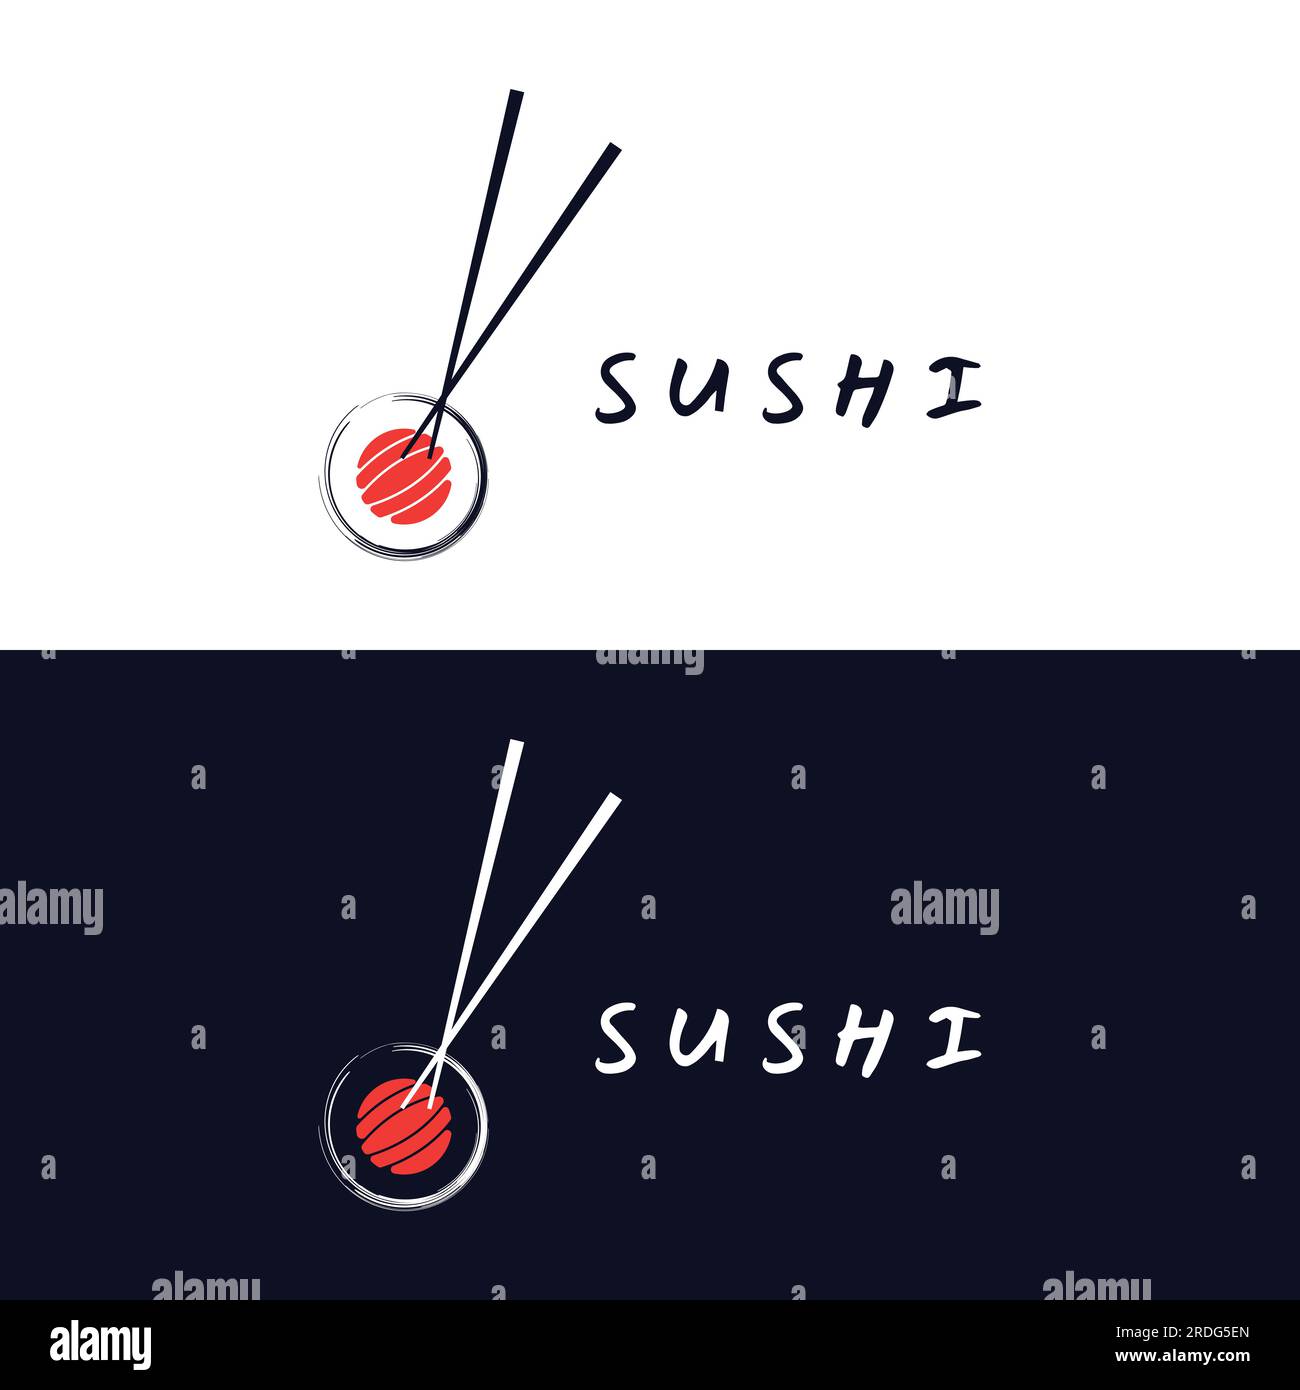 Sushi logo template.Seafood or traditional japanese cuisine with salmon, delicious food.Logo for Japanese restaurant, bar, sushi shop. Stock Vector